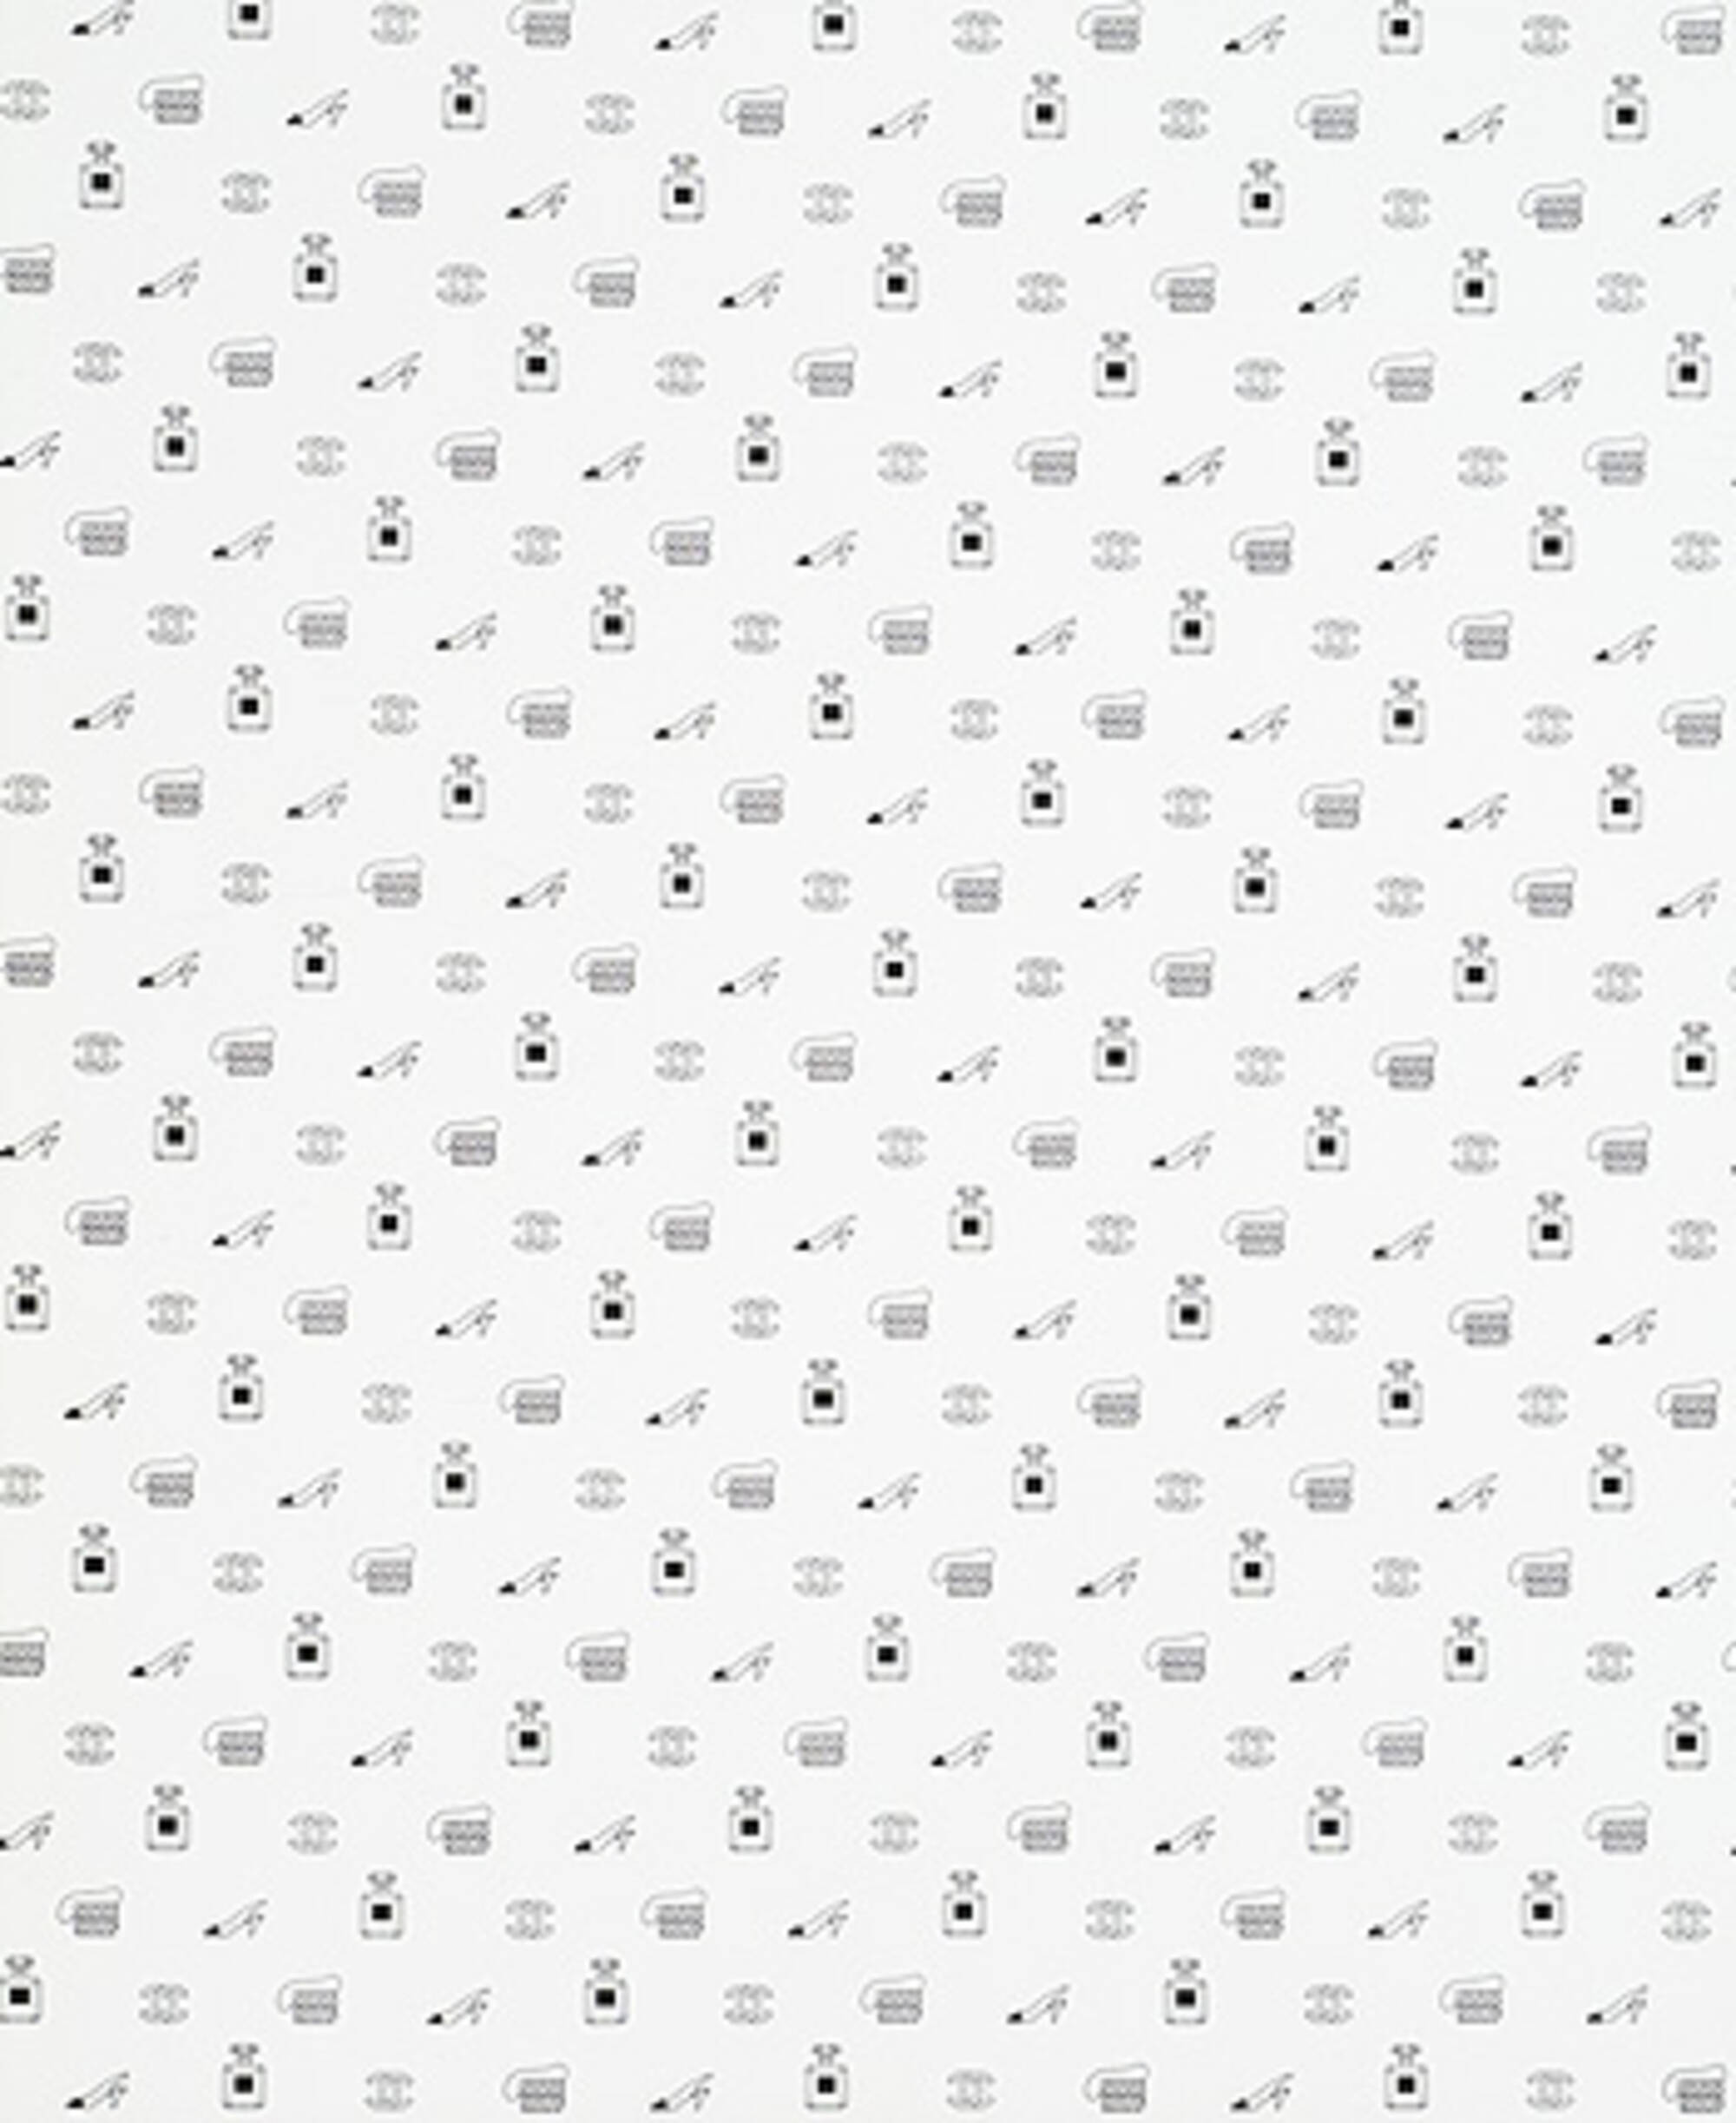 678: SYLVIE FLEURY, Chanel wrapping paper < Mass Modern, 16 September 2006  < Auctions